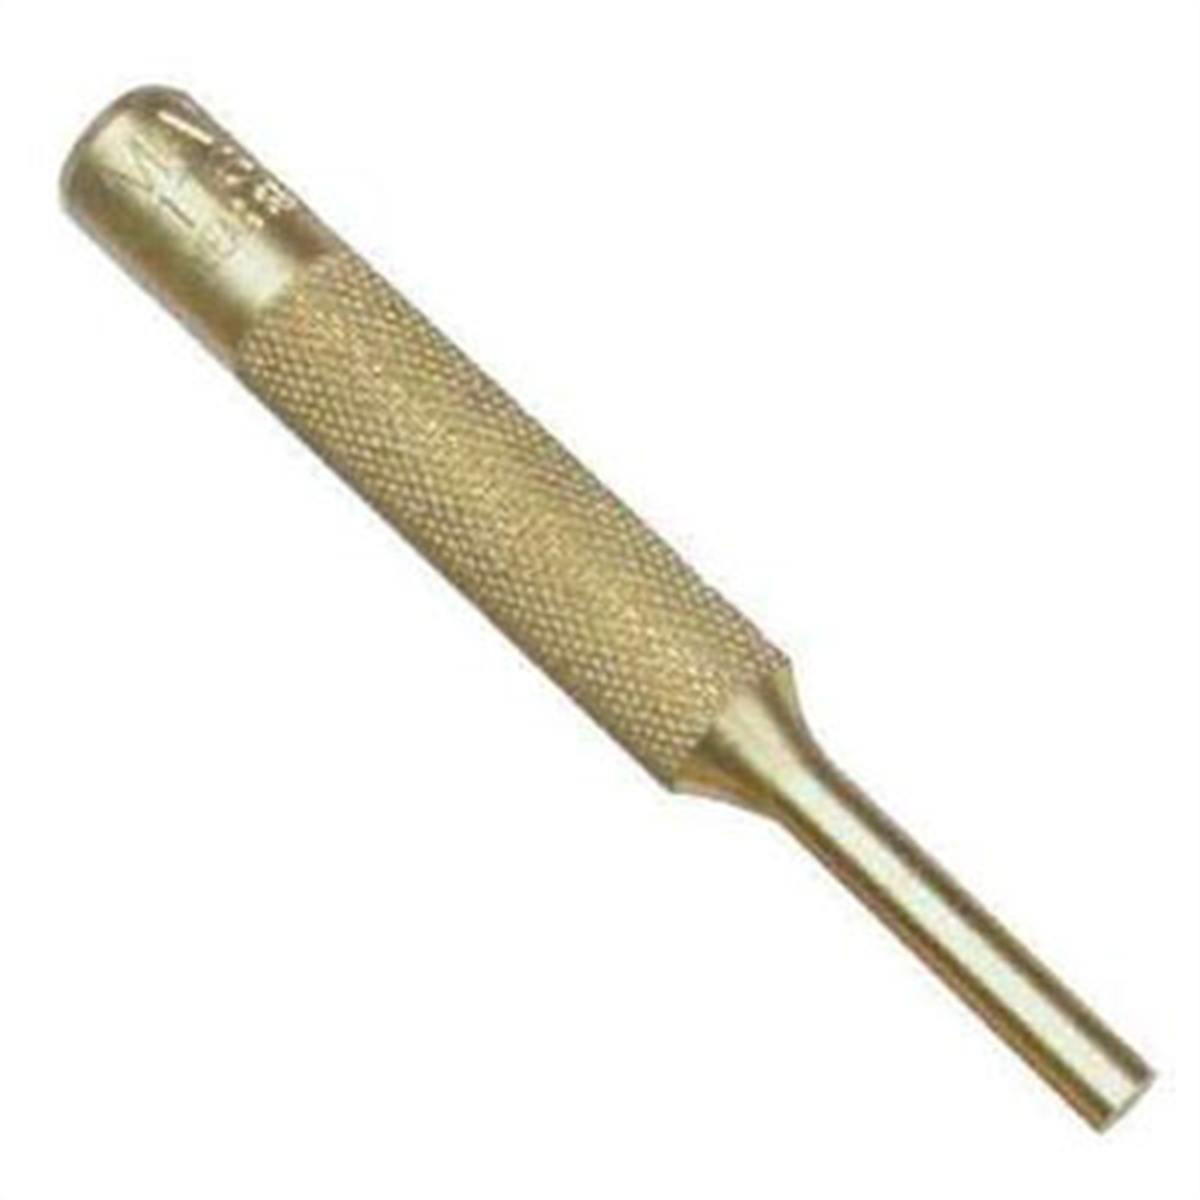 Picture of Mayhew MAY25703 0.12 x 4 in. Long Brass Pin Punch, Knurled Finish